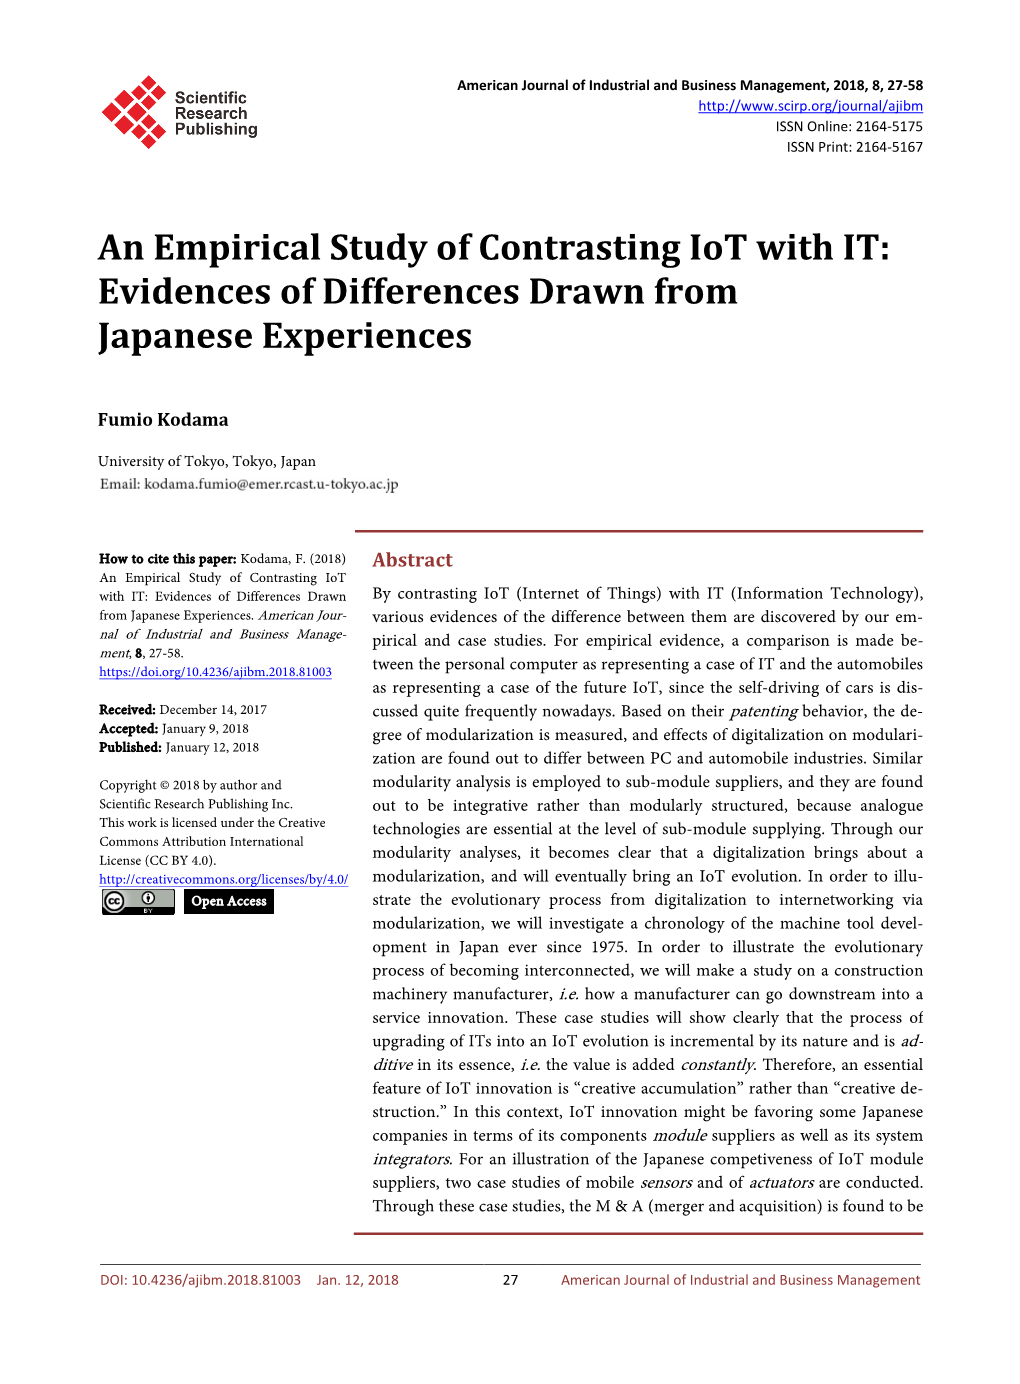 An Empirical Study of Contrasting Iot with IT: Evidences of Differences Drawn from Japanese Experiences